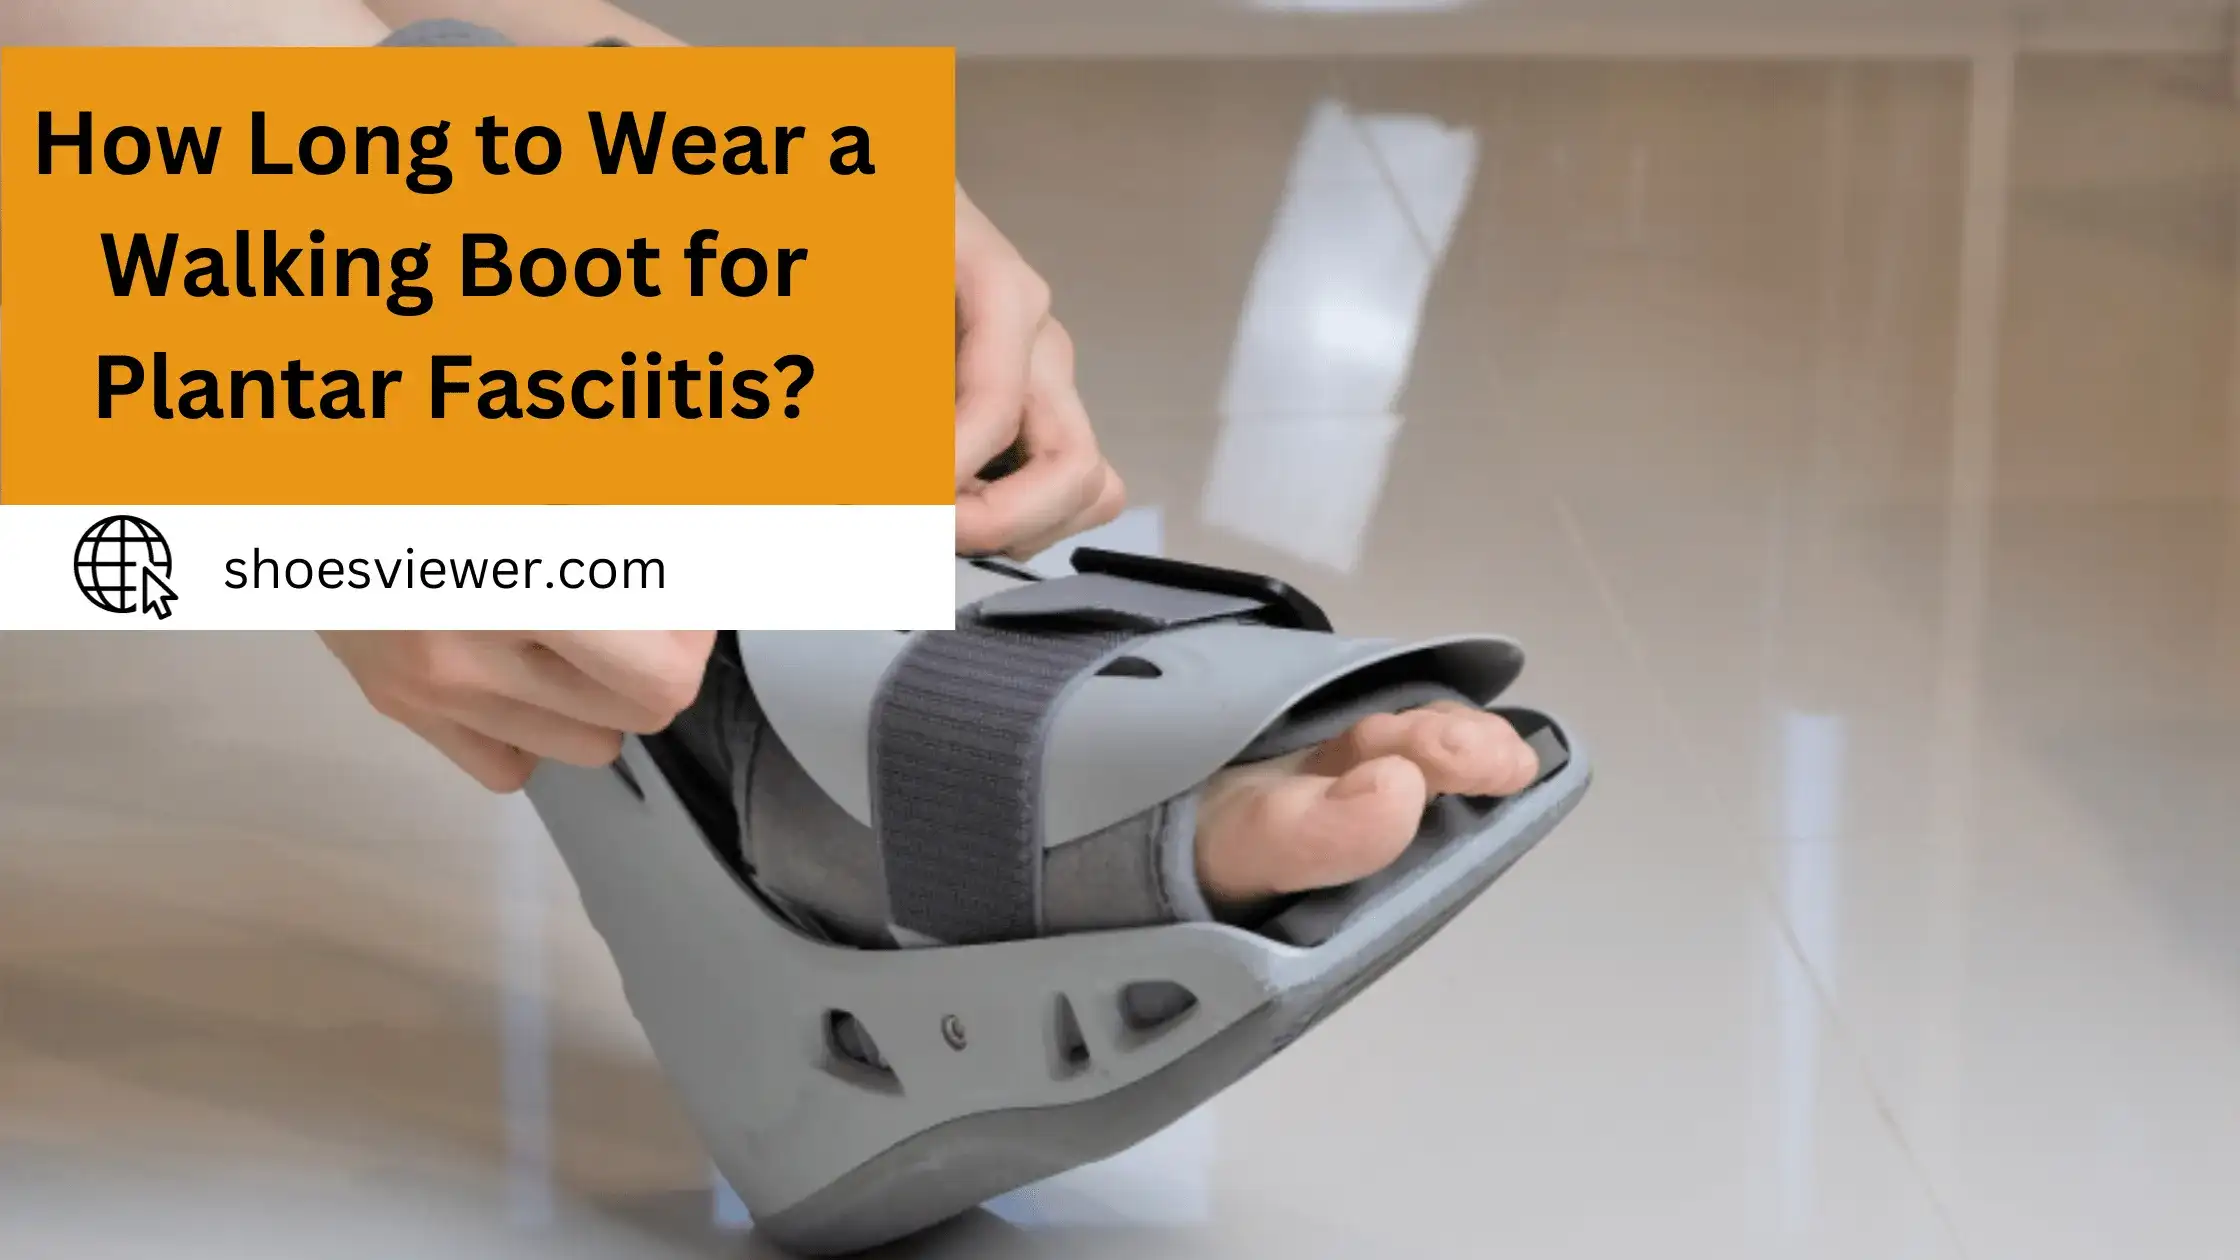 How Long To Wear A Walking Boot For Plantar Fasciitis?